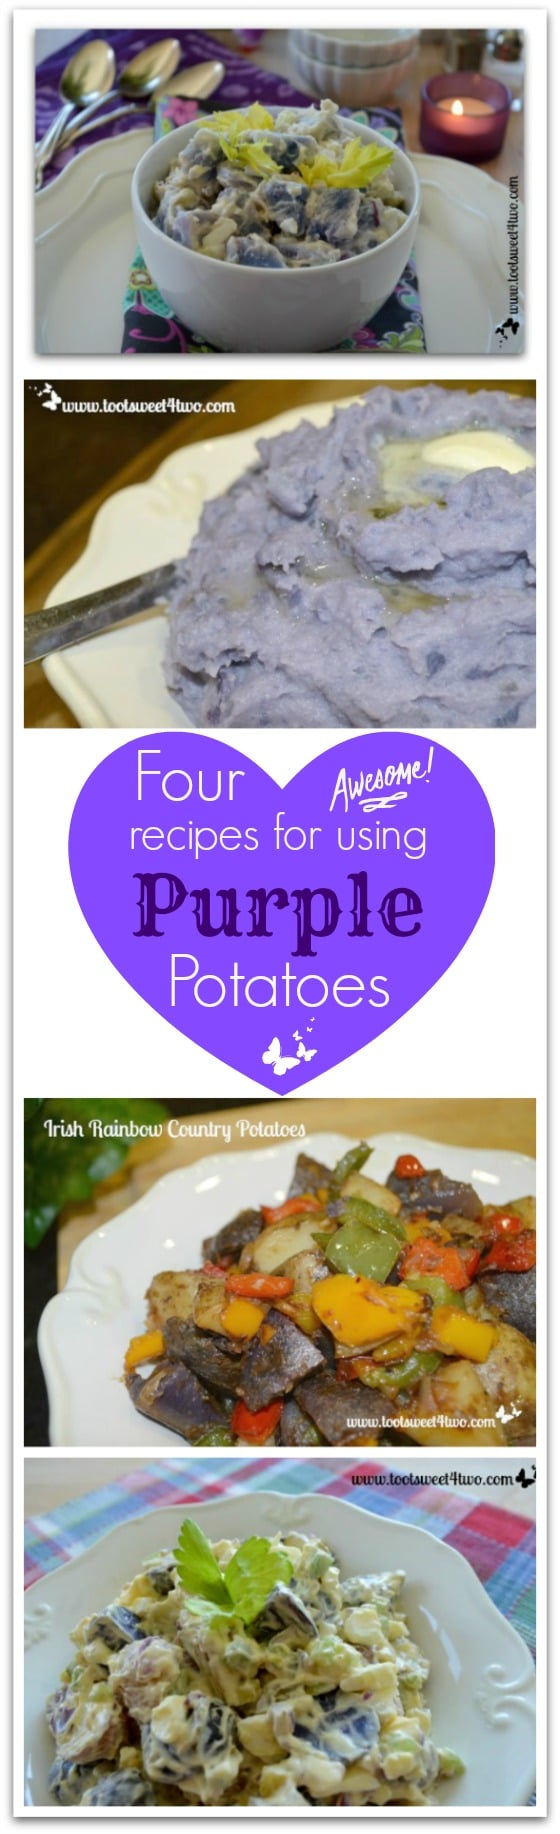 Four Awesome Recipes for using Purple Potatoes